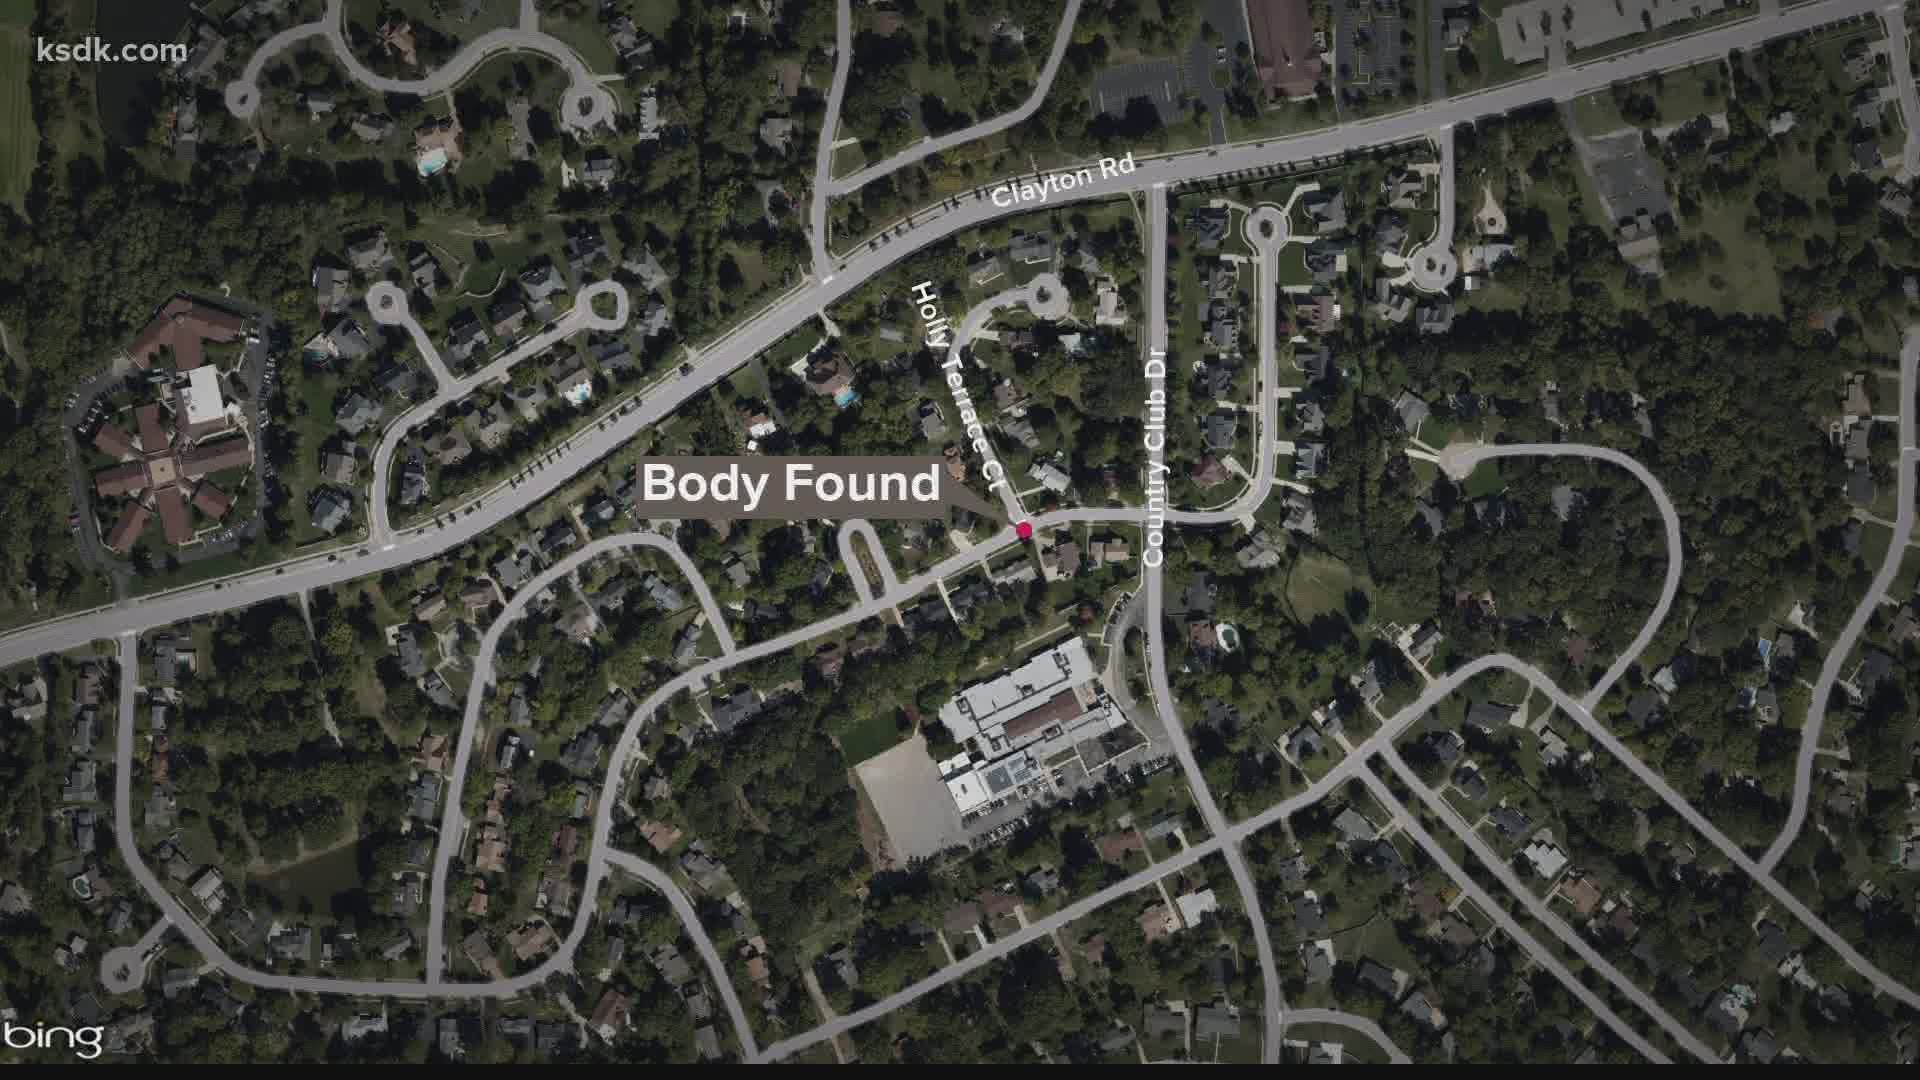 The body of a missing St. Charles man was found in the back yard of a home.